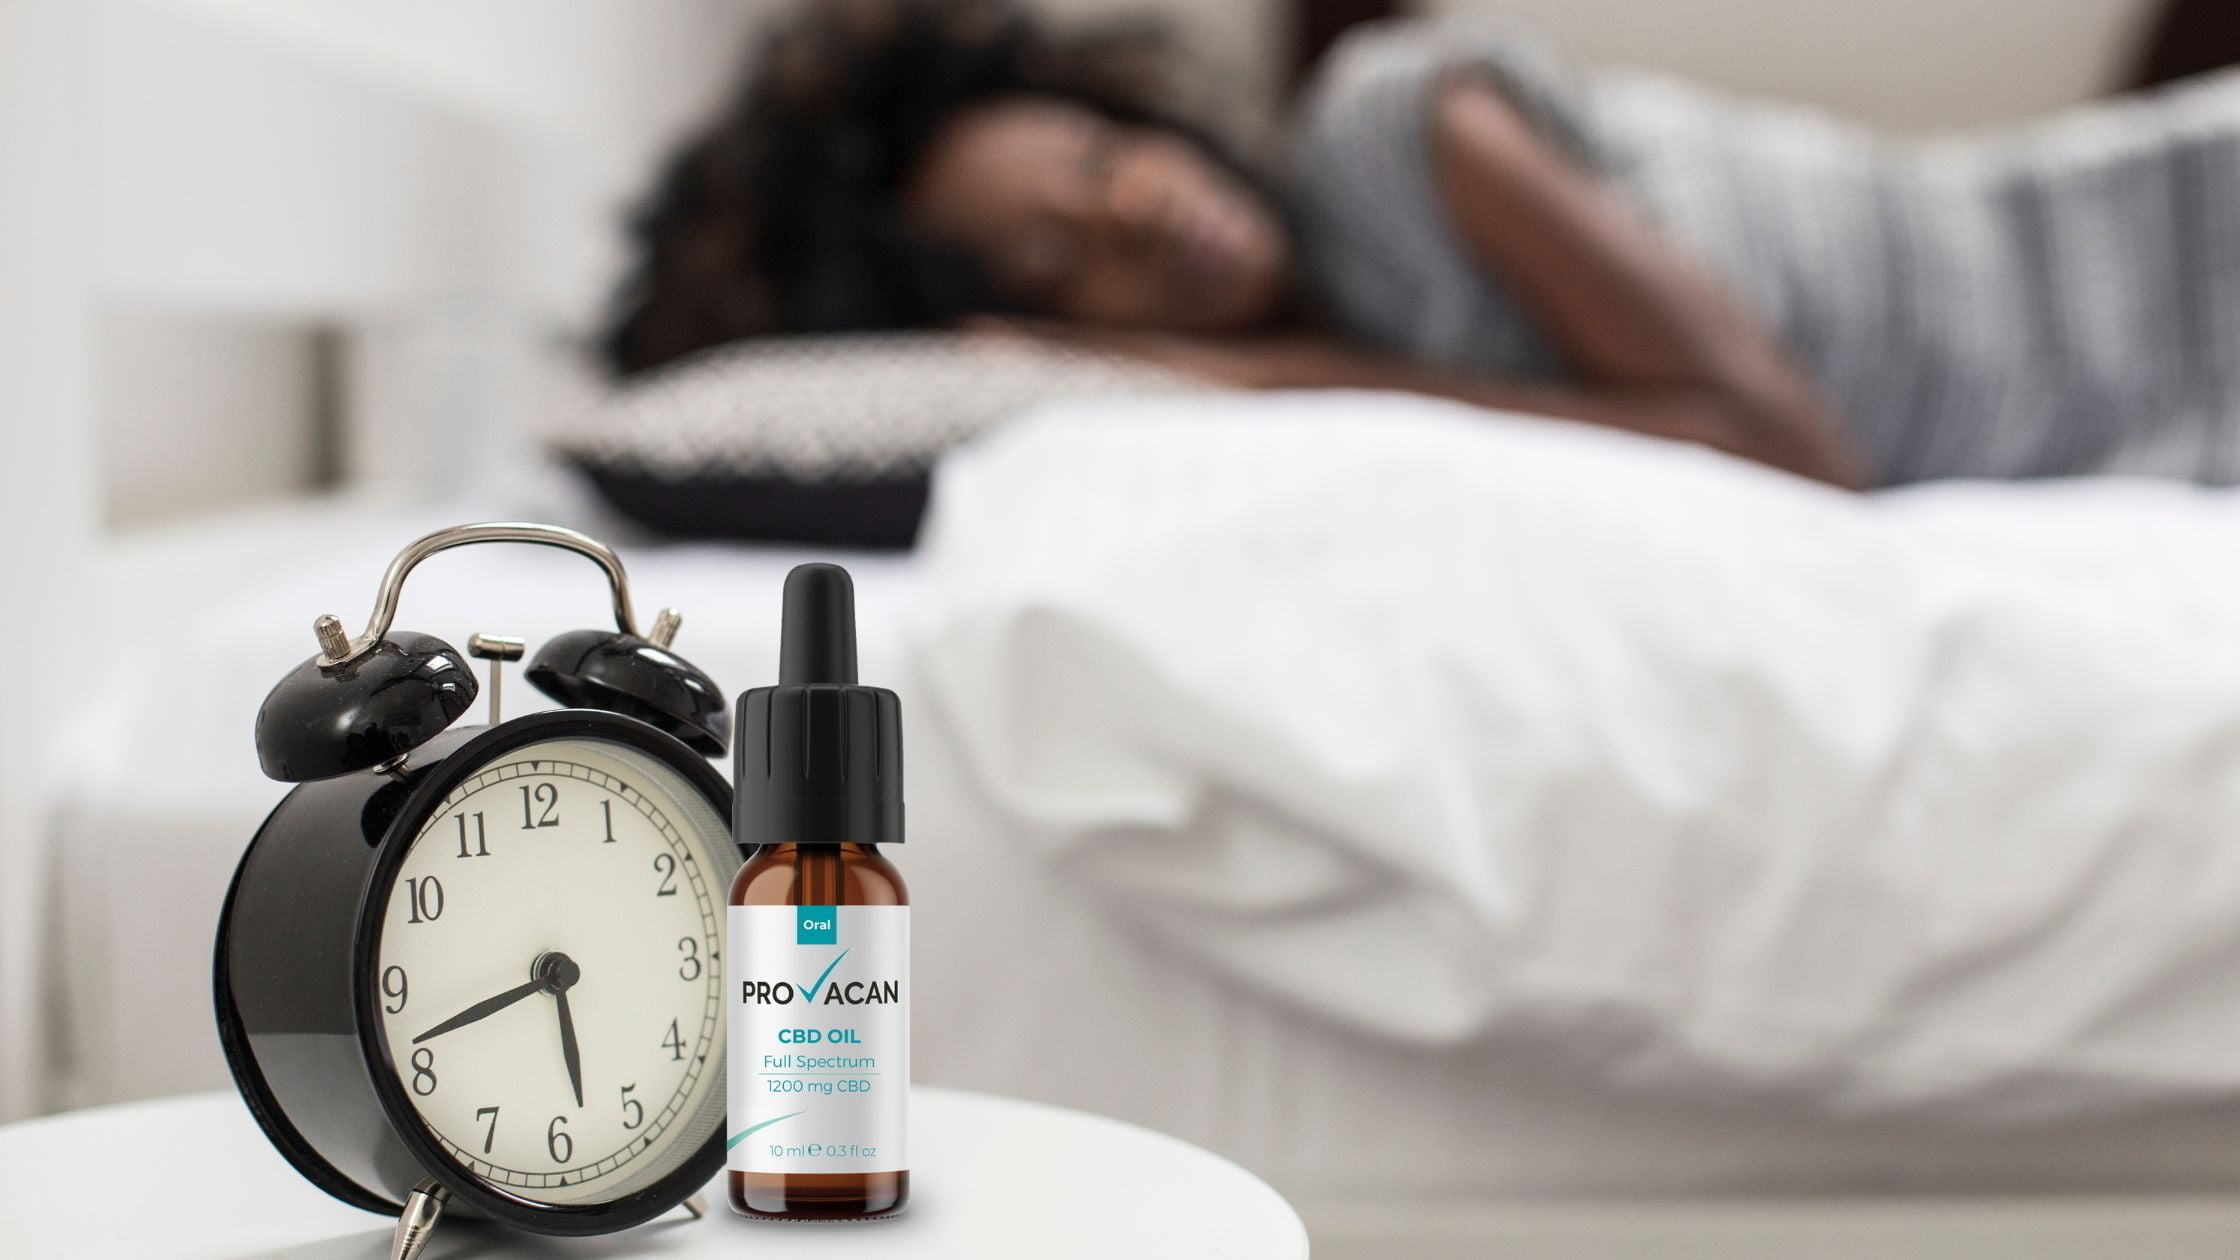 Sleep better with a bedtime routine and CBD